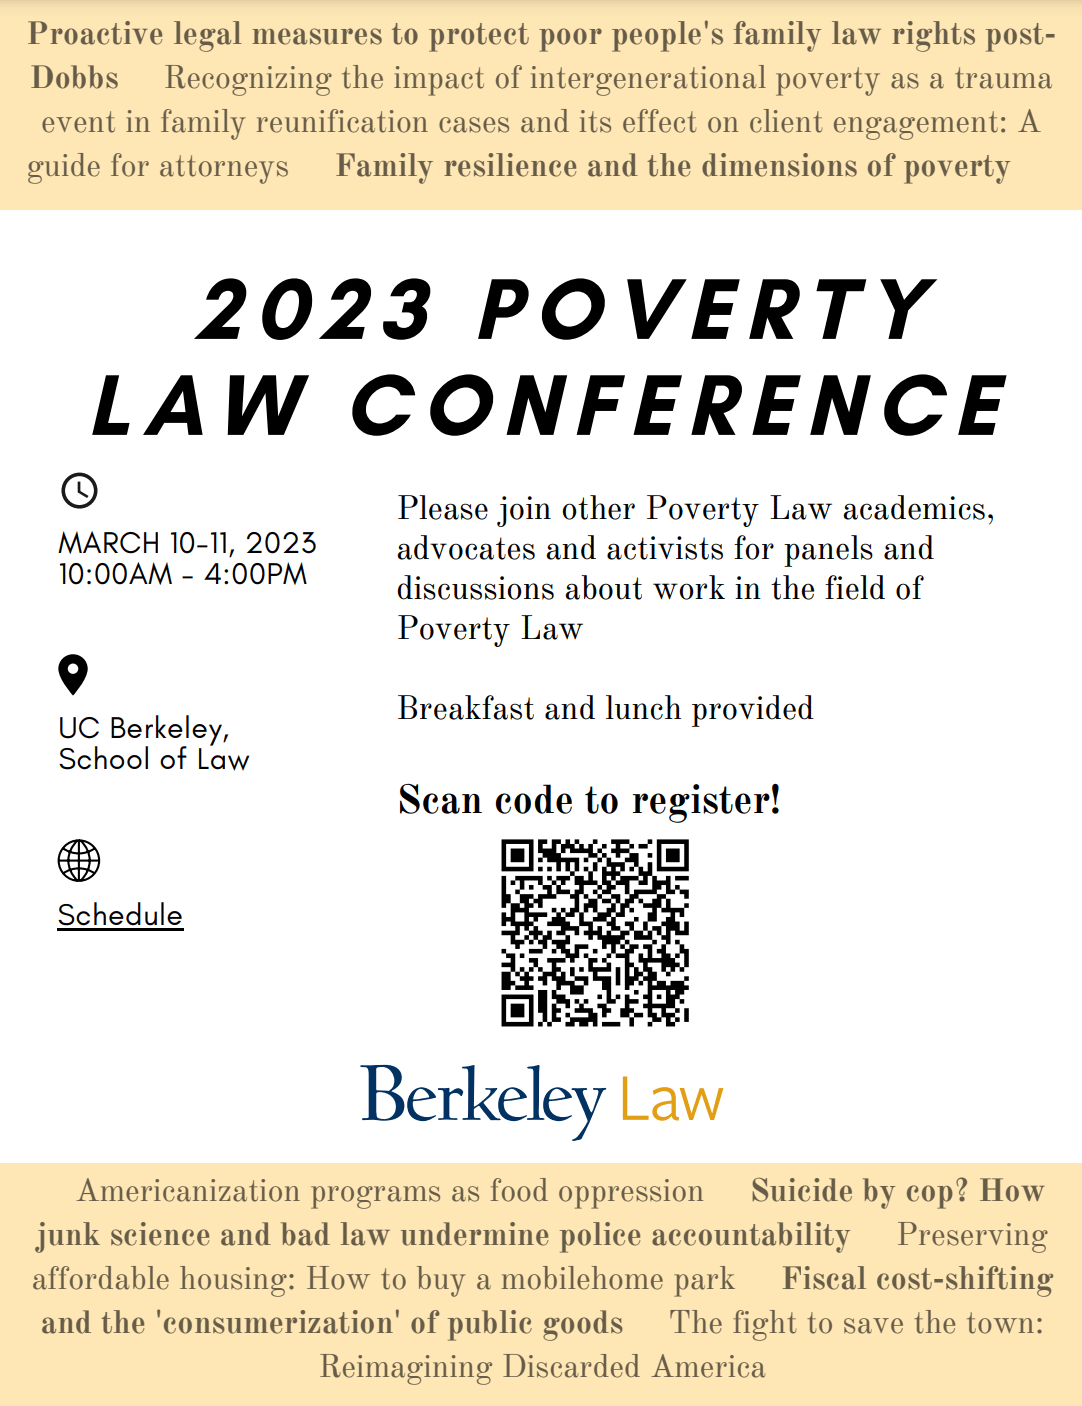 Flyer: Join Poverty Law academics, advocates and practitioners from around the country for a two-day conference featuring panel discussions and speaker events. Links to conference schedule page.